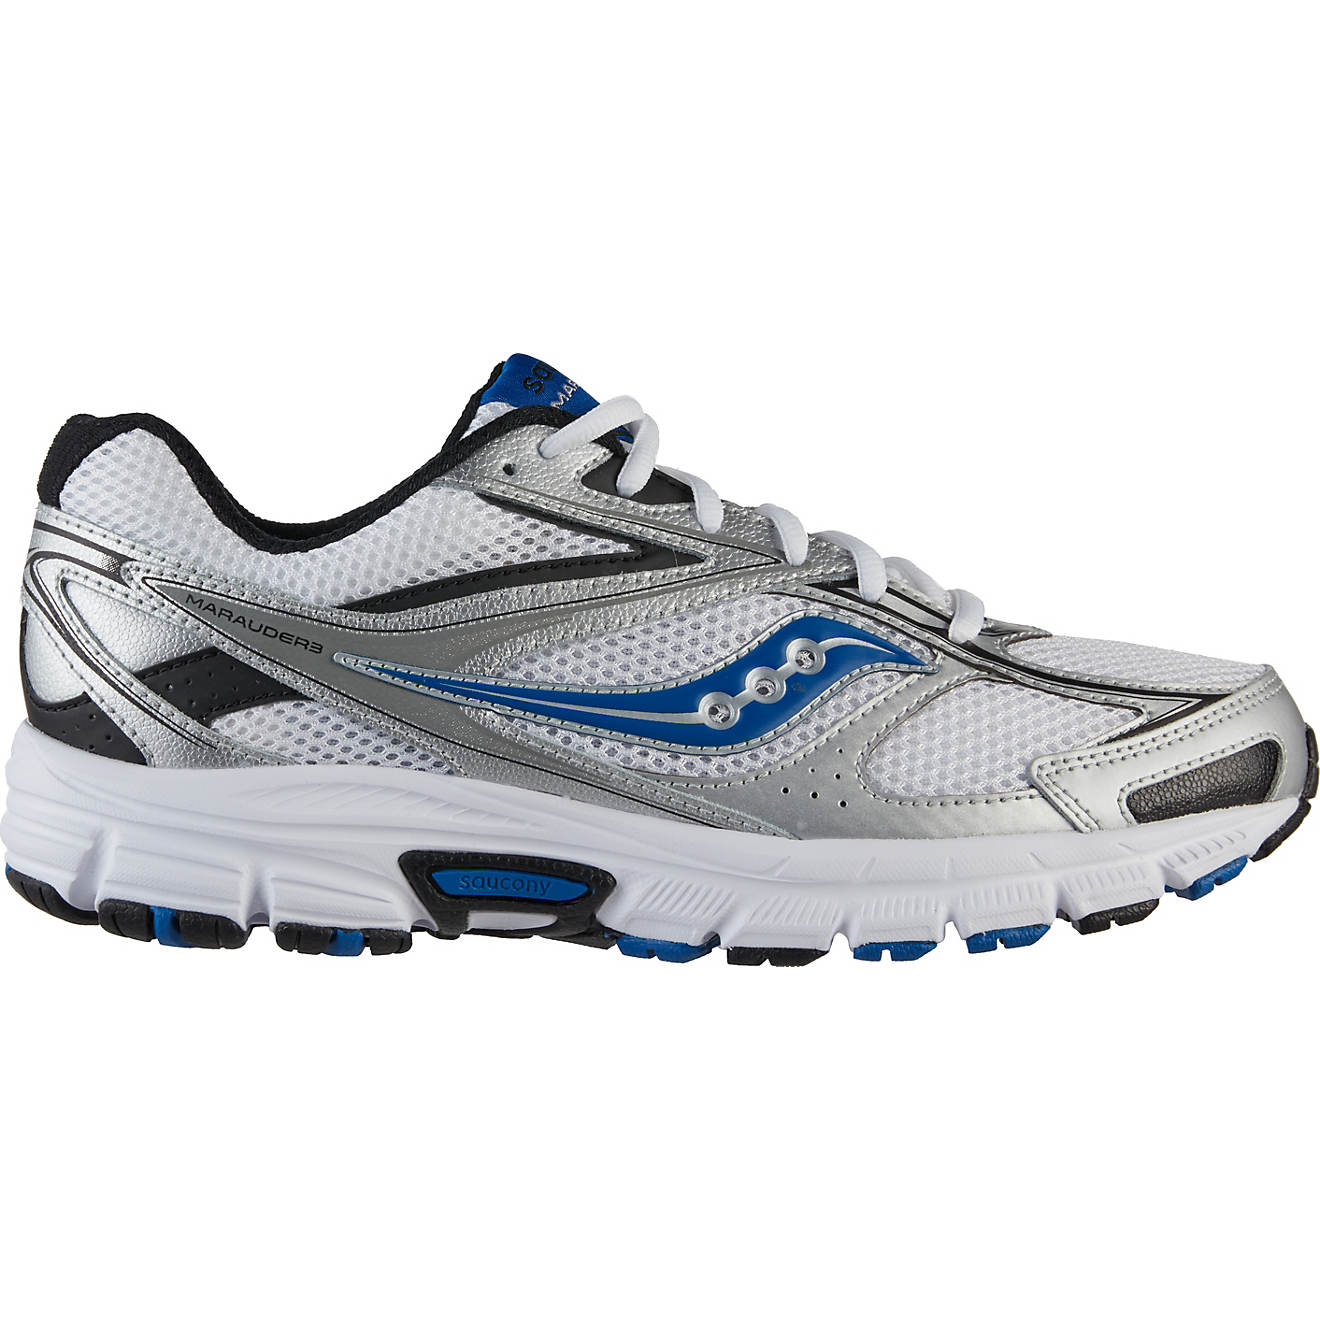 Grid Marauder 3 running shoes for $30 